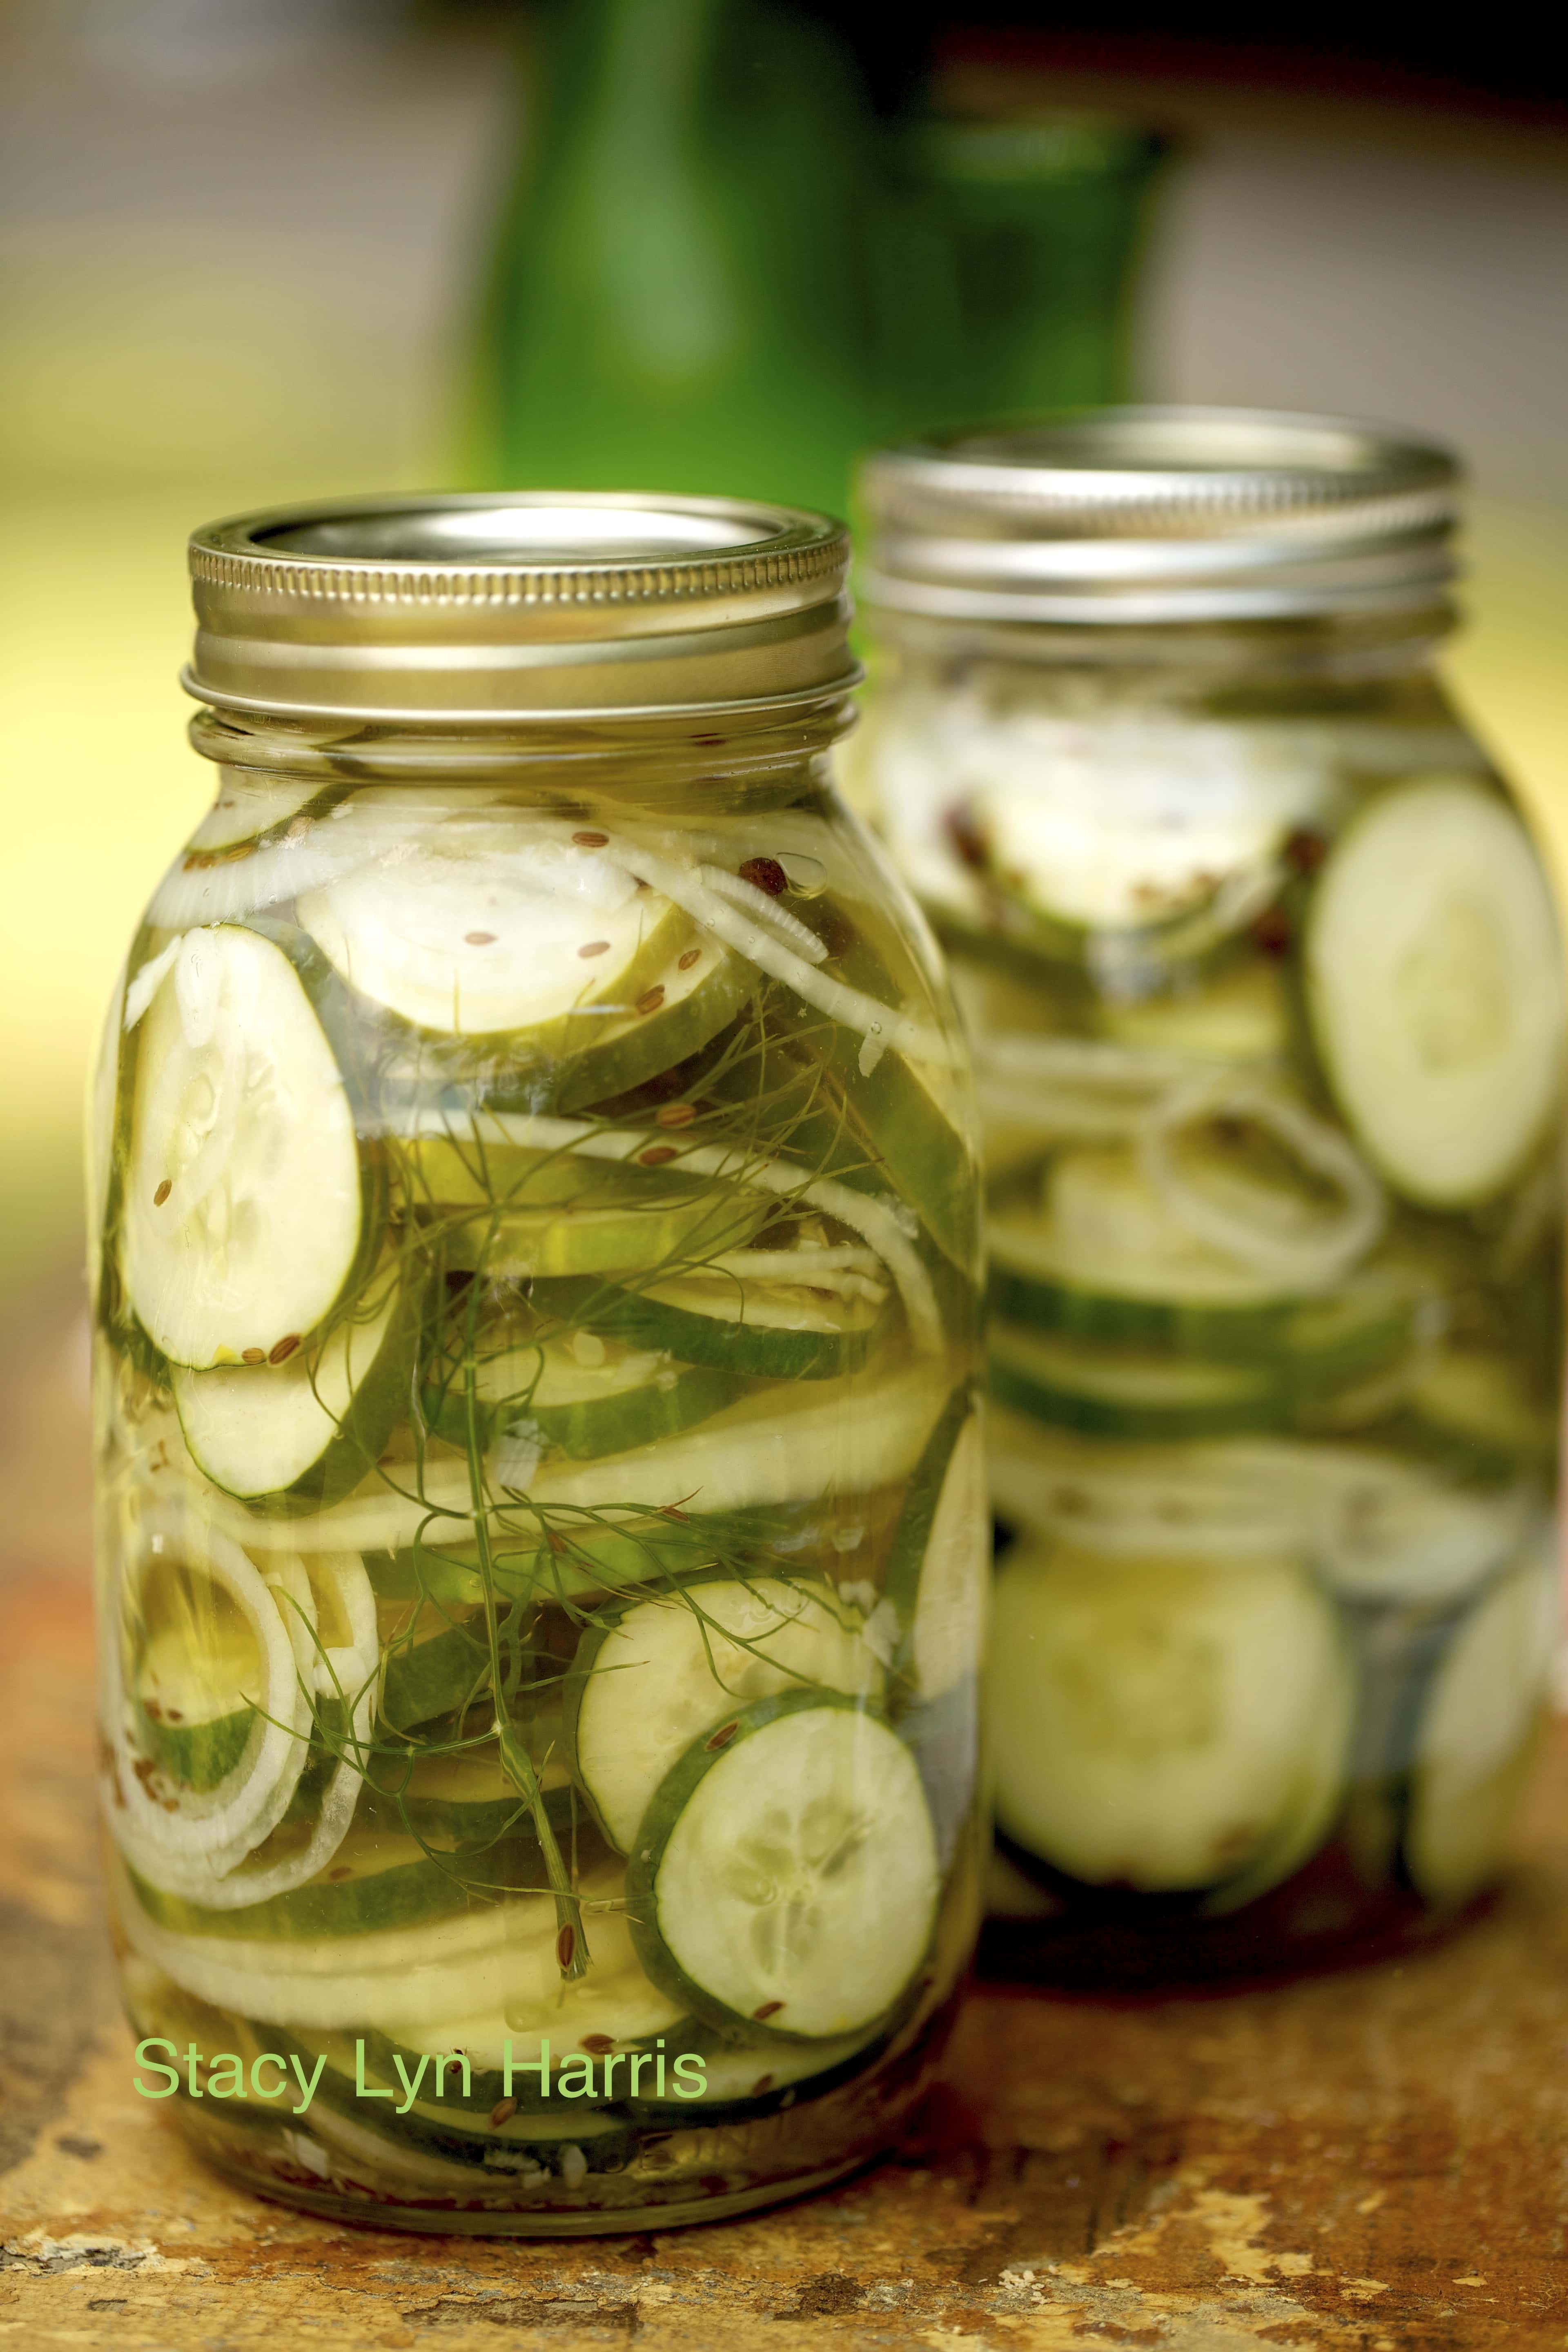 You can use either pickling or slicing cucumbers for this recipe! This is my easy go-to fast pickle recipe. It makes hamburgers very special.